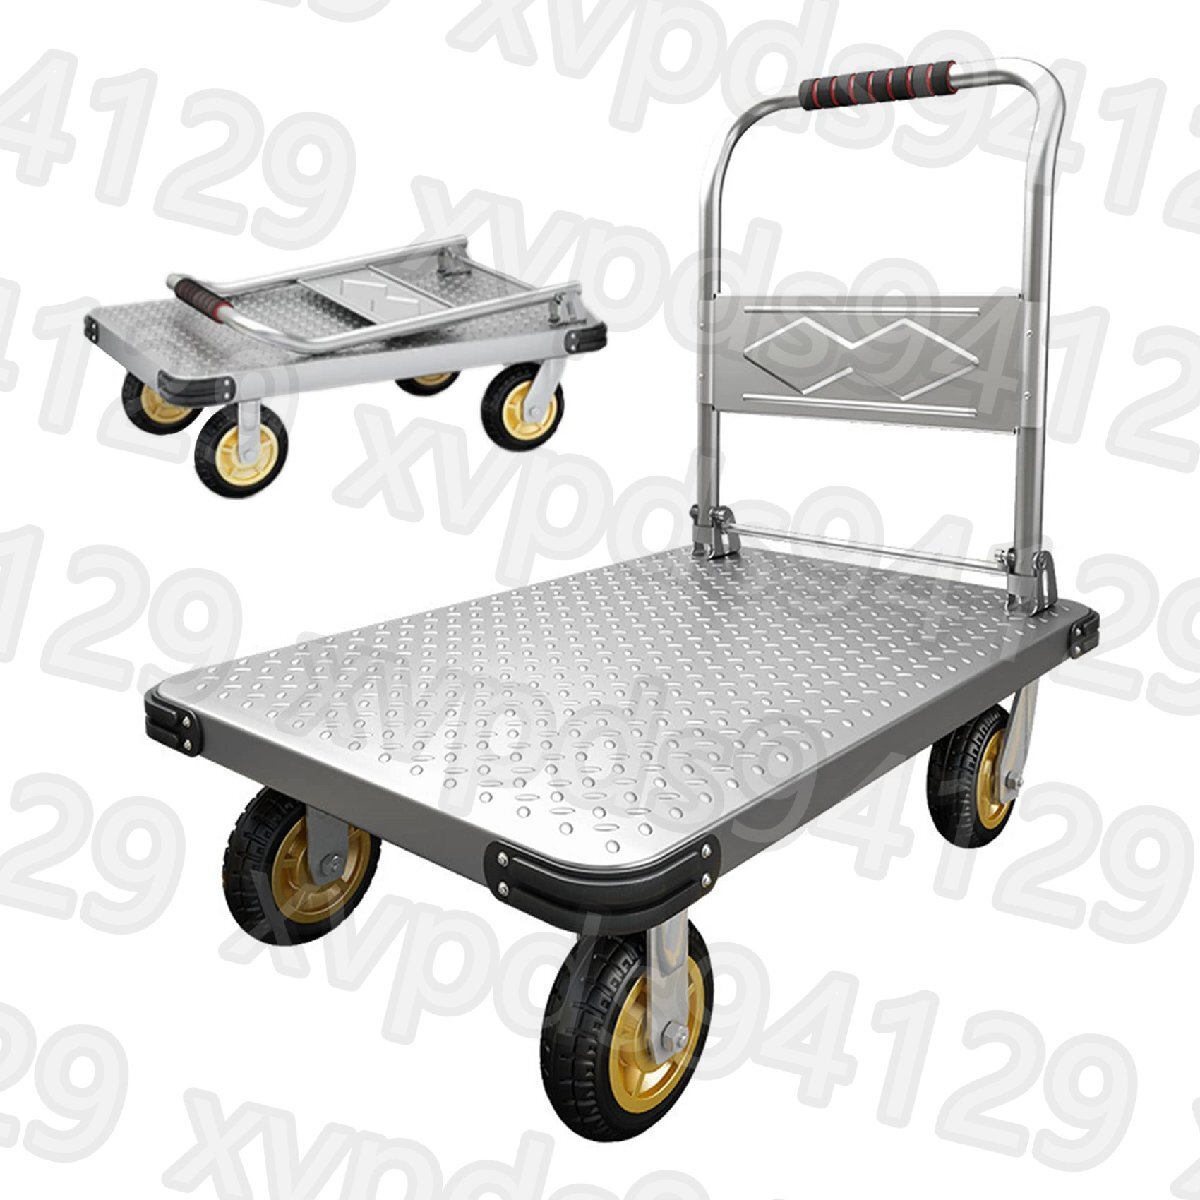  push car folding light weight quiet sound carry cart with casters . withstand load 150KG trolley fixation rope attaching basket push car 90*60cm+6 -inch wheel 